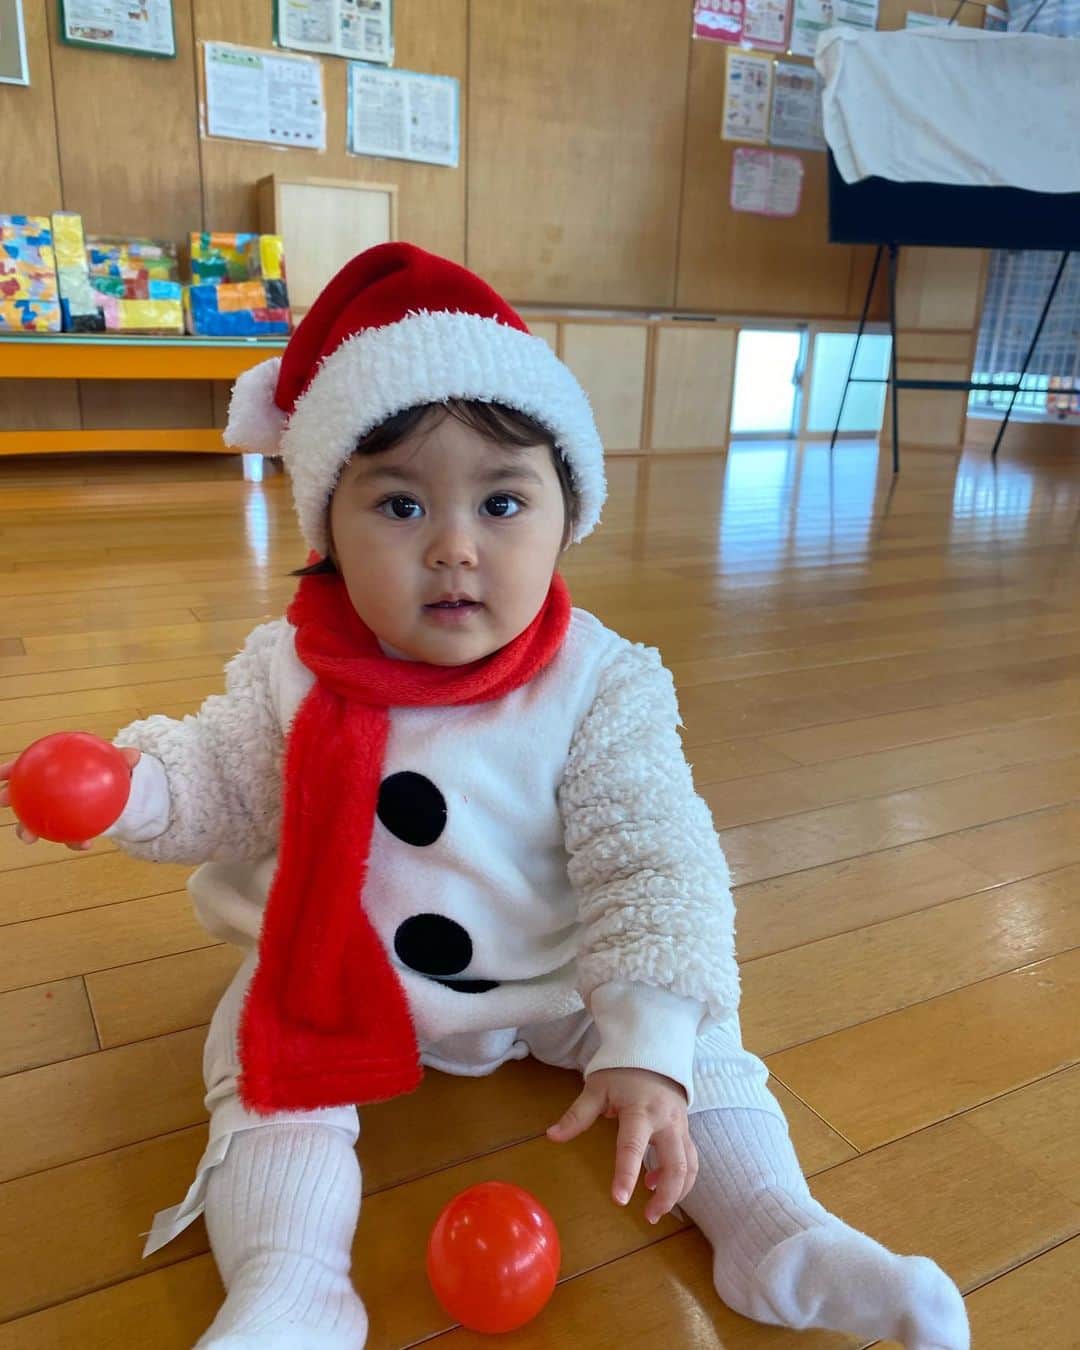 ノウィキ茉莉さんのインスタグラム写真 - (ノウィキ茉莉Instagram)「1 year old 1️⃣💕👶🏼 (January 3rd)  Happy Birthday my sweet baby! Can’t believe it’s already been a year since you have come into our life. We are so grateful for you and I am so glad to be your mommy! Thank you for always bringing us so much joy!   Here are some updates of our baby’s progress: 1. She learned how to wave 👋  2. She can drink from a straw 🥤 3. She can stand on her own without support 4. She learned how to baby sign “more” 5. She imitates what we do 6. She loves to play the piano and guitar 🎹 🎸  7. She can climb up the slide and slide down on her own 🛝  8. She can draw with a pen and paper (scribble mostly) 📝  9. She can walk with her baby walker toy 10. She can eat her food with her spoon/fork (still working on it.. mostly uses her hands) 🥄 11. She loves going outside   1歳 1️⃣💕👶🏼 (1月3日)  ハッピーバースデー🎂🎈 莉嘉が私たちのもとに生まれてきてくれて もう1年経つなんて信じられない〜🥲 本当に幸せ🥹💕 私を母にさせてくれて本当にありがとう〜 生まれてきてくれてありがとう〜☺️  リカが1歳になってこれまでの成長について振り返りたいと思います:  1. 手を振るようになった👋  2. ストローで飲み物を飲めるようになった🥤 3. 何も掴まずに立ち上がれるようになった 4. ベビーサインで「もっと」ができるようになった 5. 私たちの動きの真似をするようになった 6. ピアノとギターを触るのが好き🎹 🎸  7. 滑り台を登ったり、滑ったりできるようになった(頭から滑ることが多い笑)🛝  8. お絵描きおもちゃで上手くペンを持ちながら描けるようになった📝  9. ウォーカーのおもちゃを押しながら歩くようになった 10. 離乳食を食べる時にスプーンやフォークを自分で持って食べたがるようになった(最終的には手で食べてるけど🤣)🥄 11. お出かけが大好き❤ (顔に風があたるのが気持ちいいみたい)  #1歳ベビー #1yearold #birthday #1歳誕生日 #お家スタジオ #1yearoldbirthday #誕生日 #ハッピーバースデー #babiesofinstagram #babies #motherhood #ベビスタグラム #赤ちゃんのいる生活 #赤ちゃんのいる暮らし  #親バカ部 #クォーター #girlmom #女の子ママ #newmom #momlife #沖縄ベビー #okinawa #沖縄子育て」2月24日 7時35分 - kristen.marii